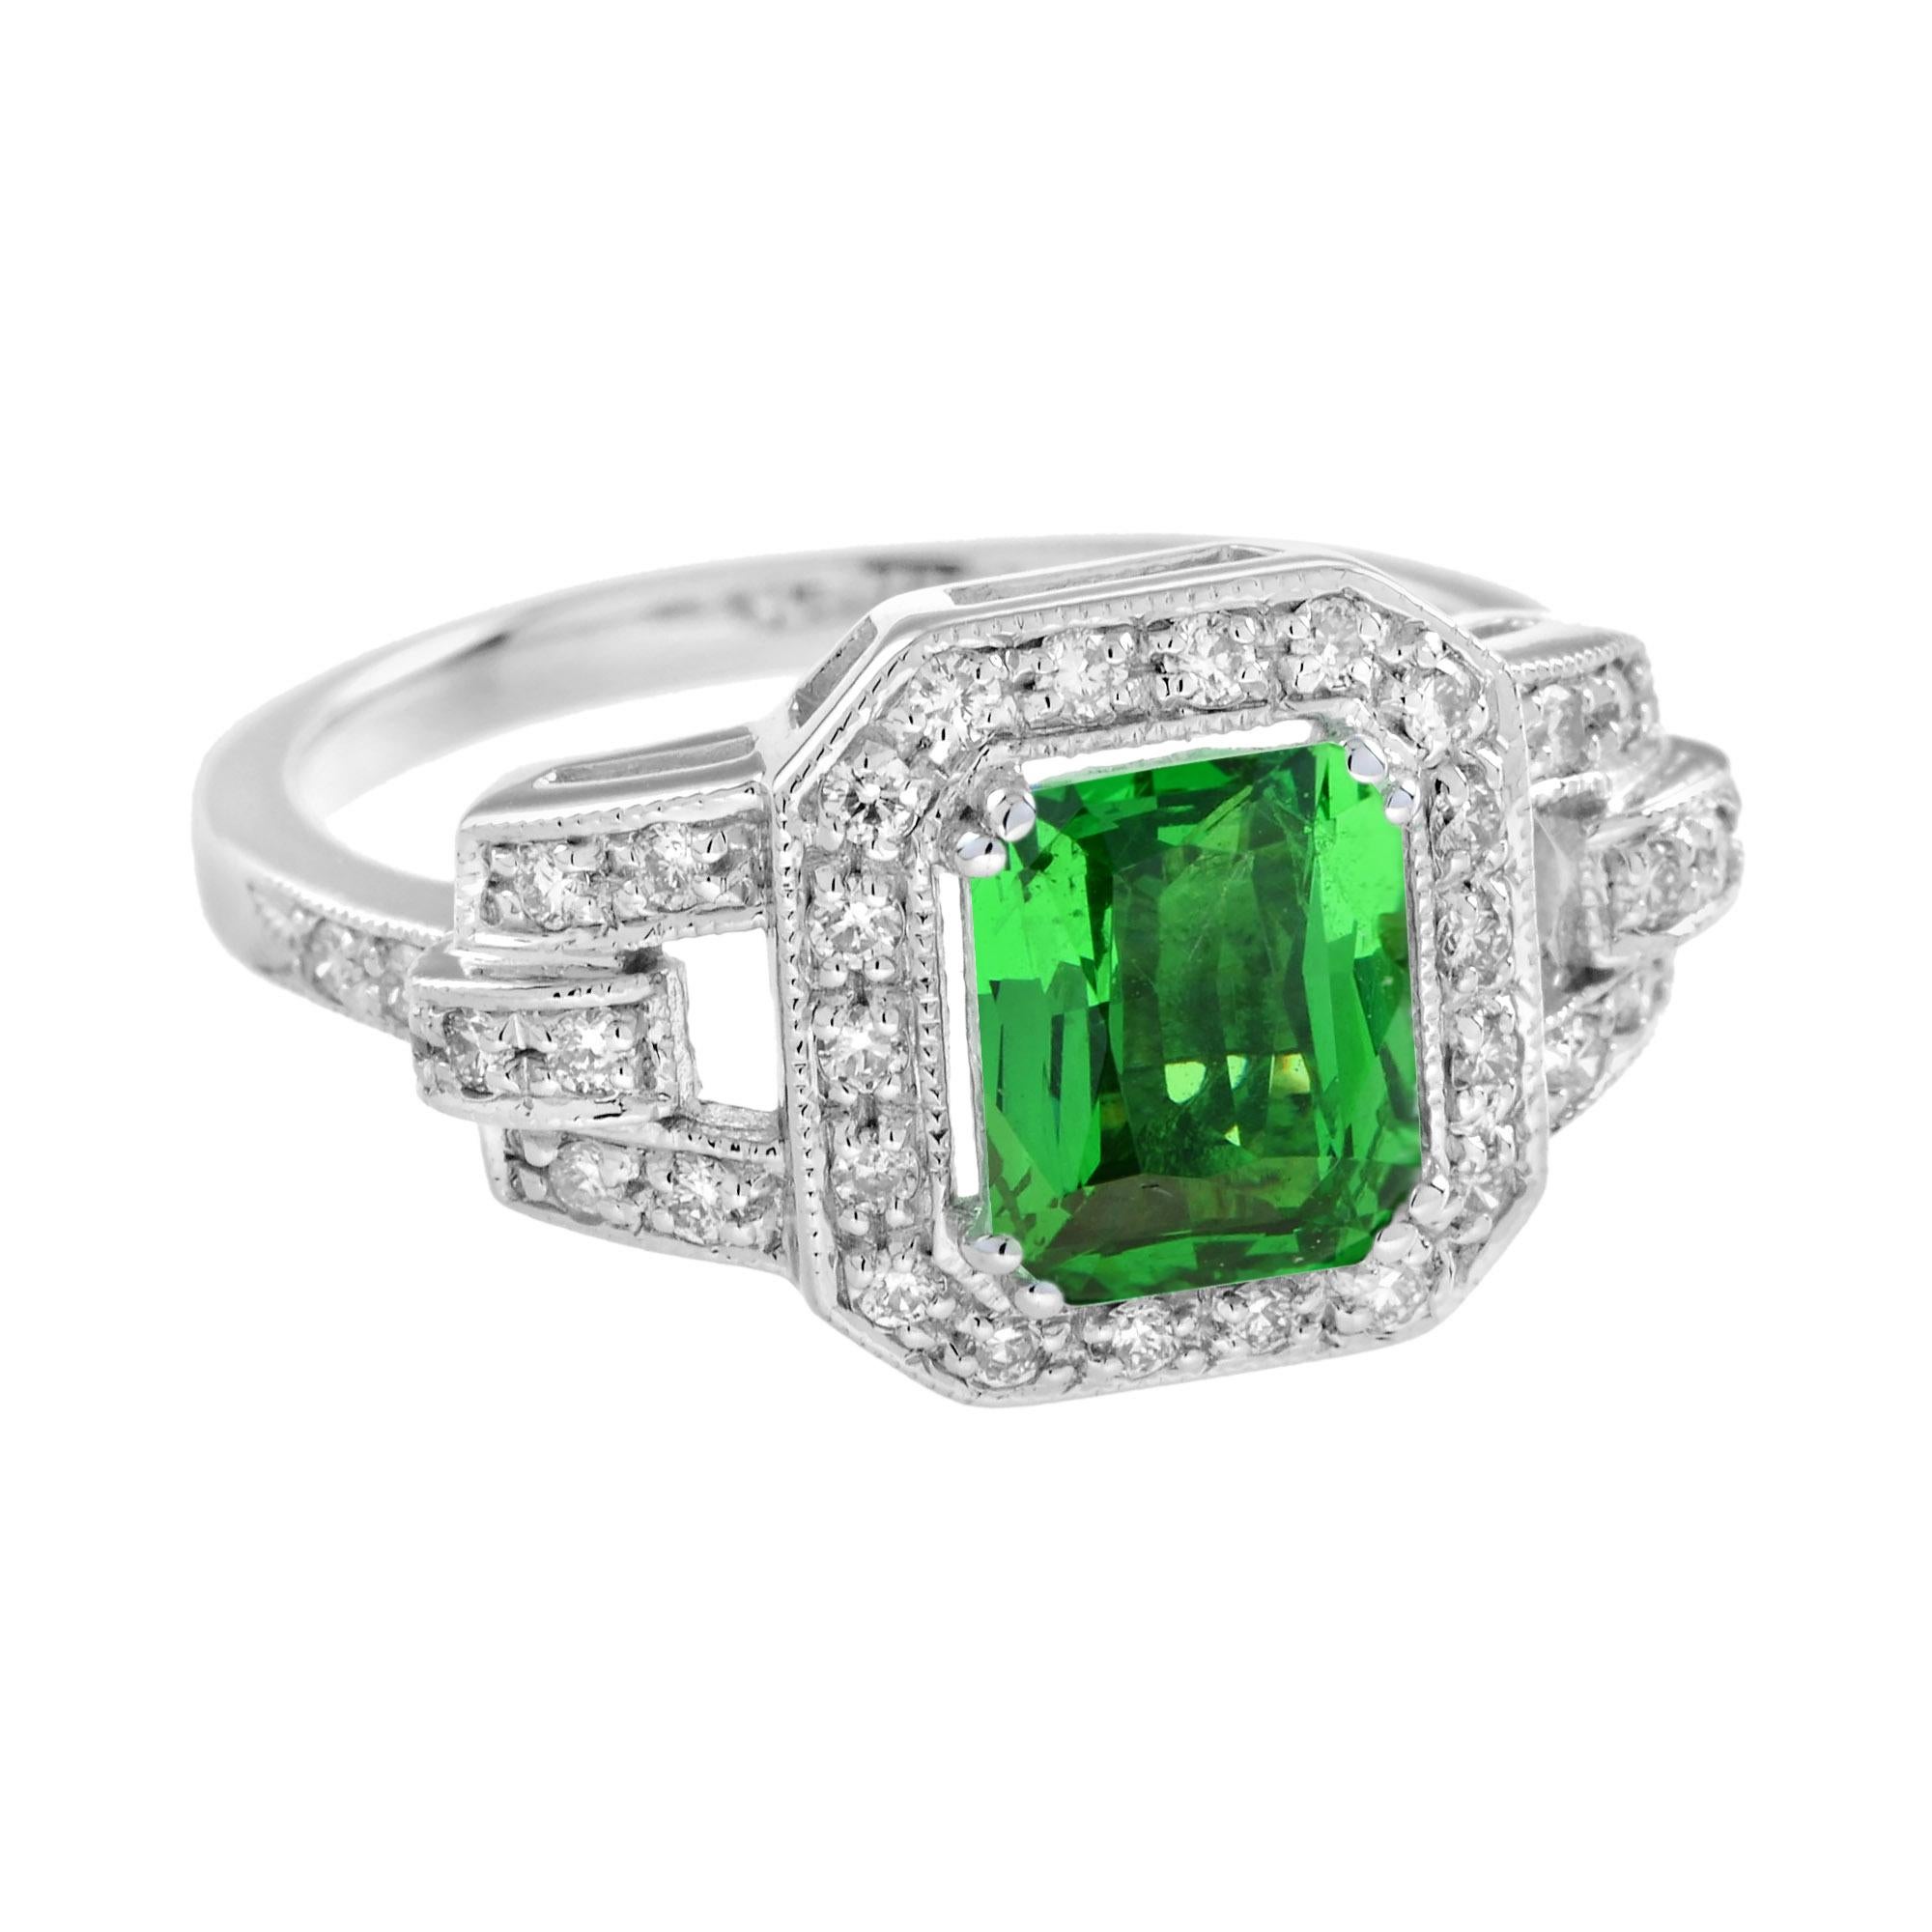 Emerald Cut Tsavorite and Diamond Art Deco Style Engagement Ring in 18K White Gold For Sale